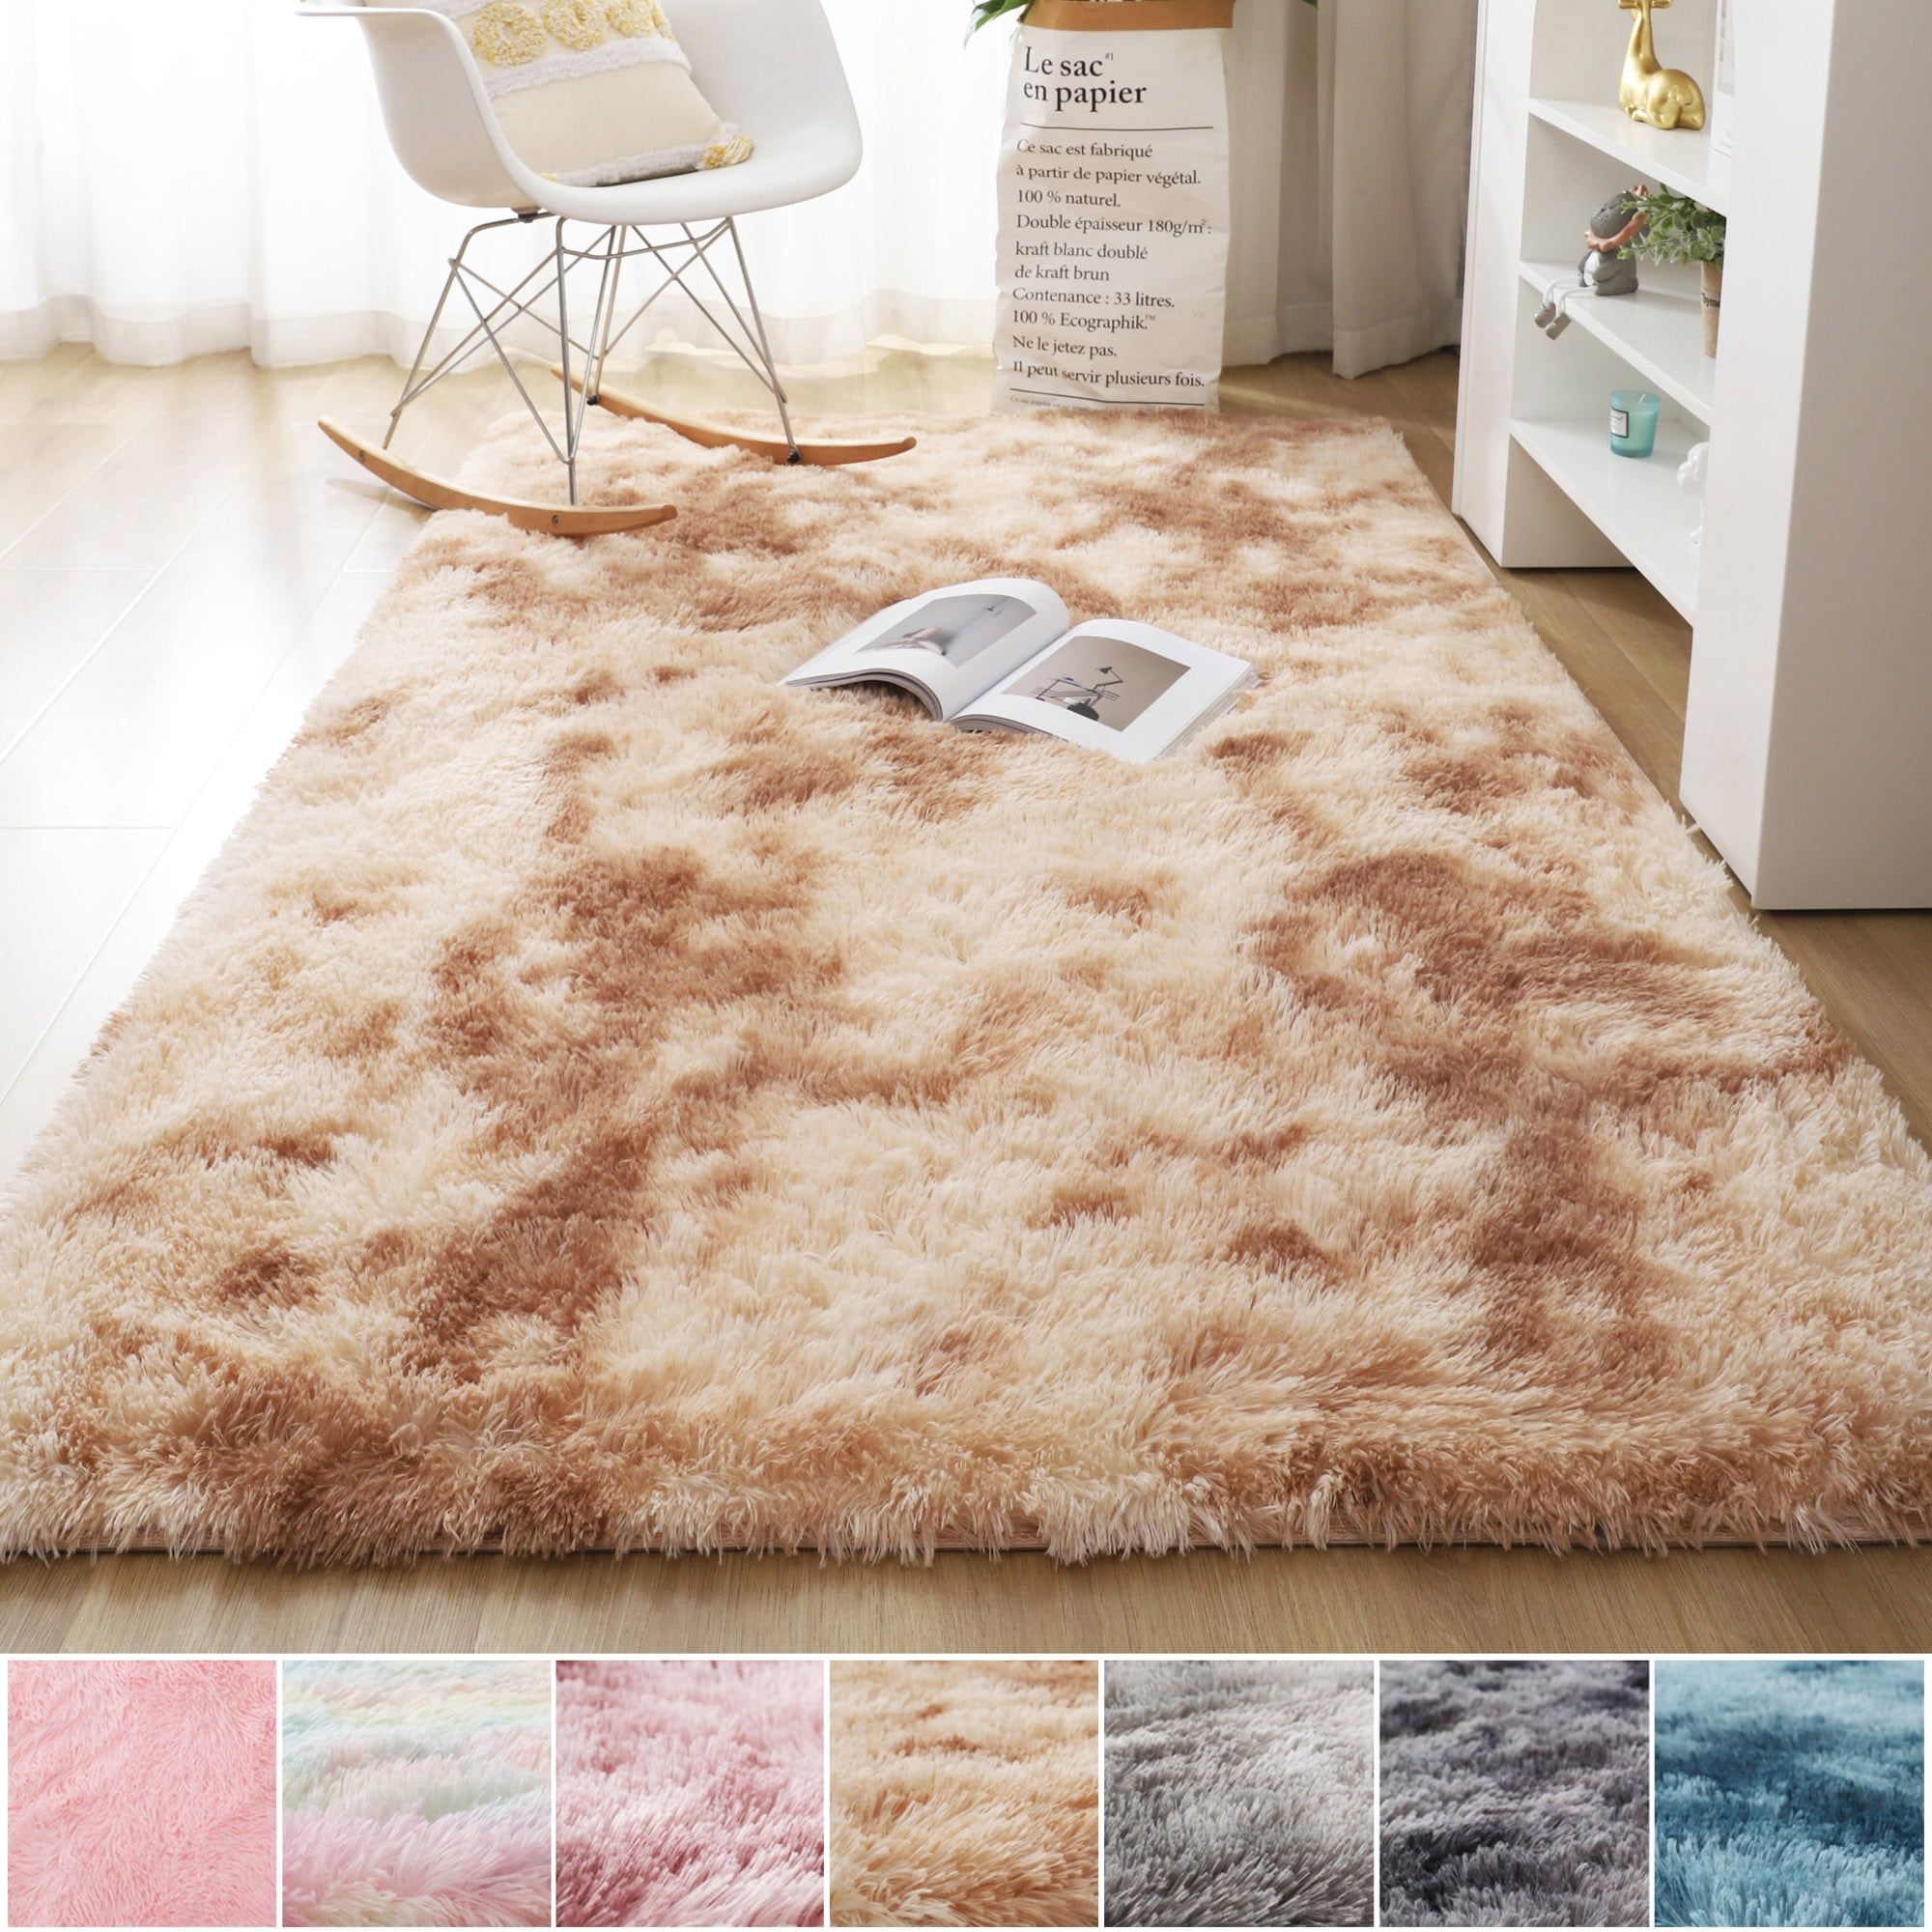 Shag Area Rug Summer Styel Be Your Own Sun Shaggy Carpet Nursery Rug for Kids Baby Bedroom Living Room Home Decor 5ft Indoor Round Area Rugs 